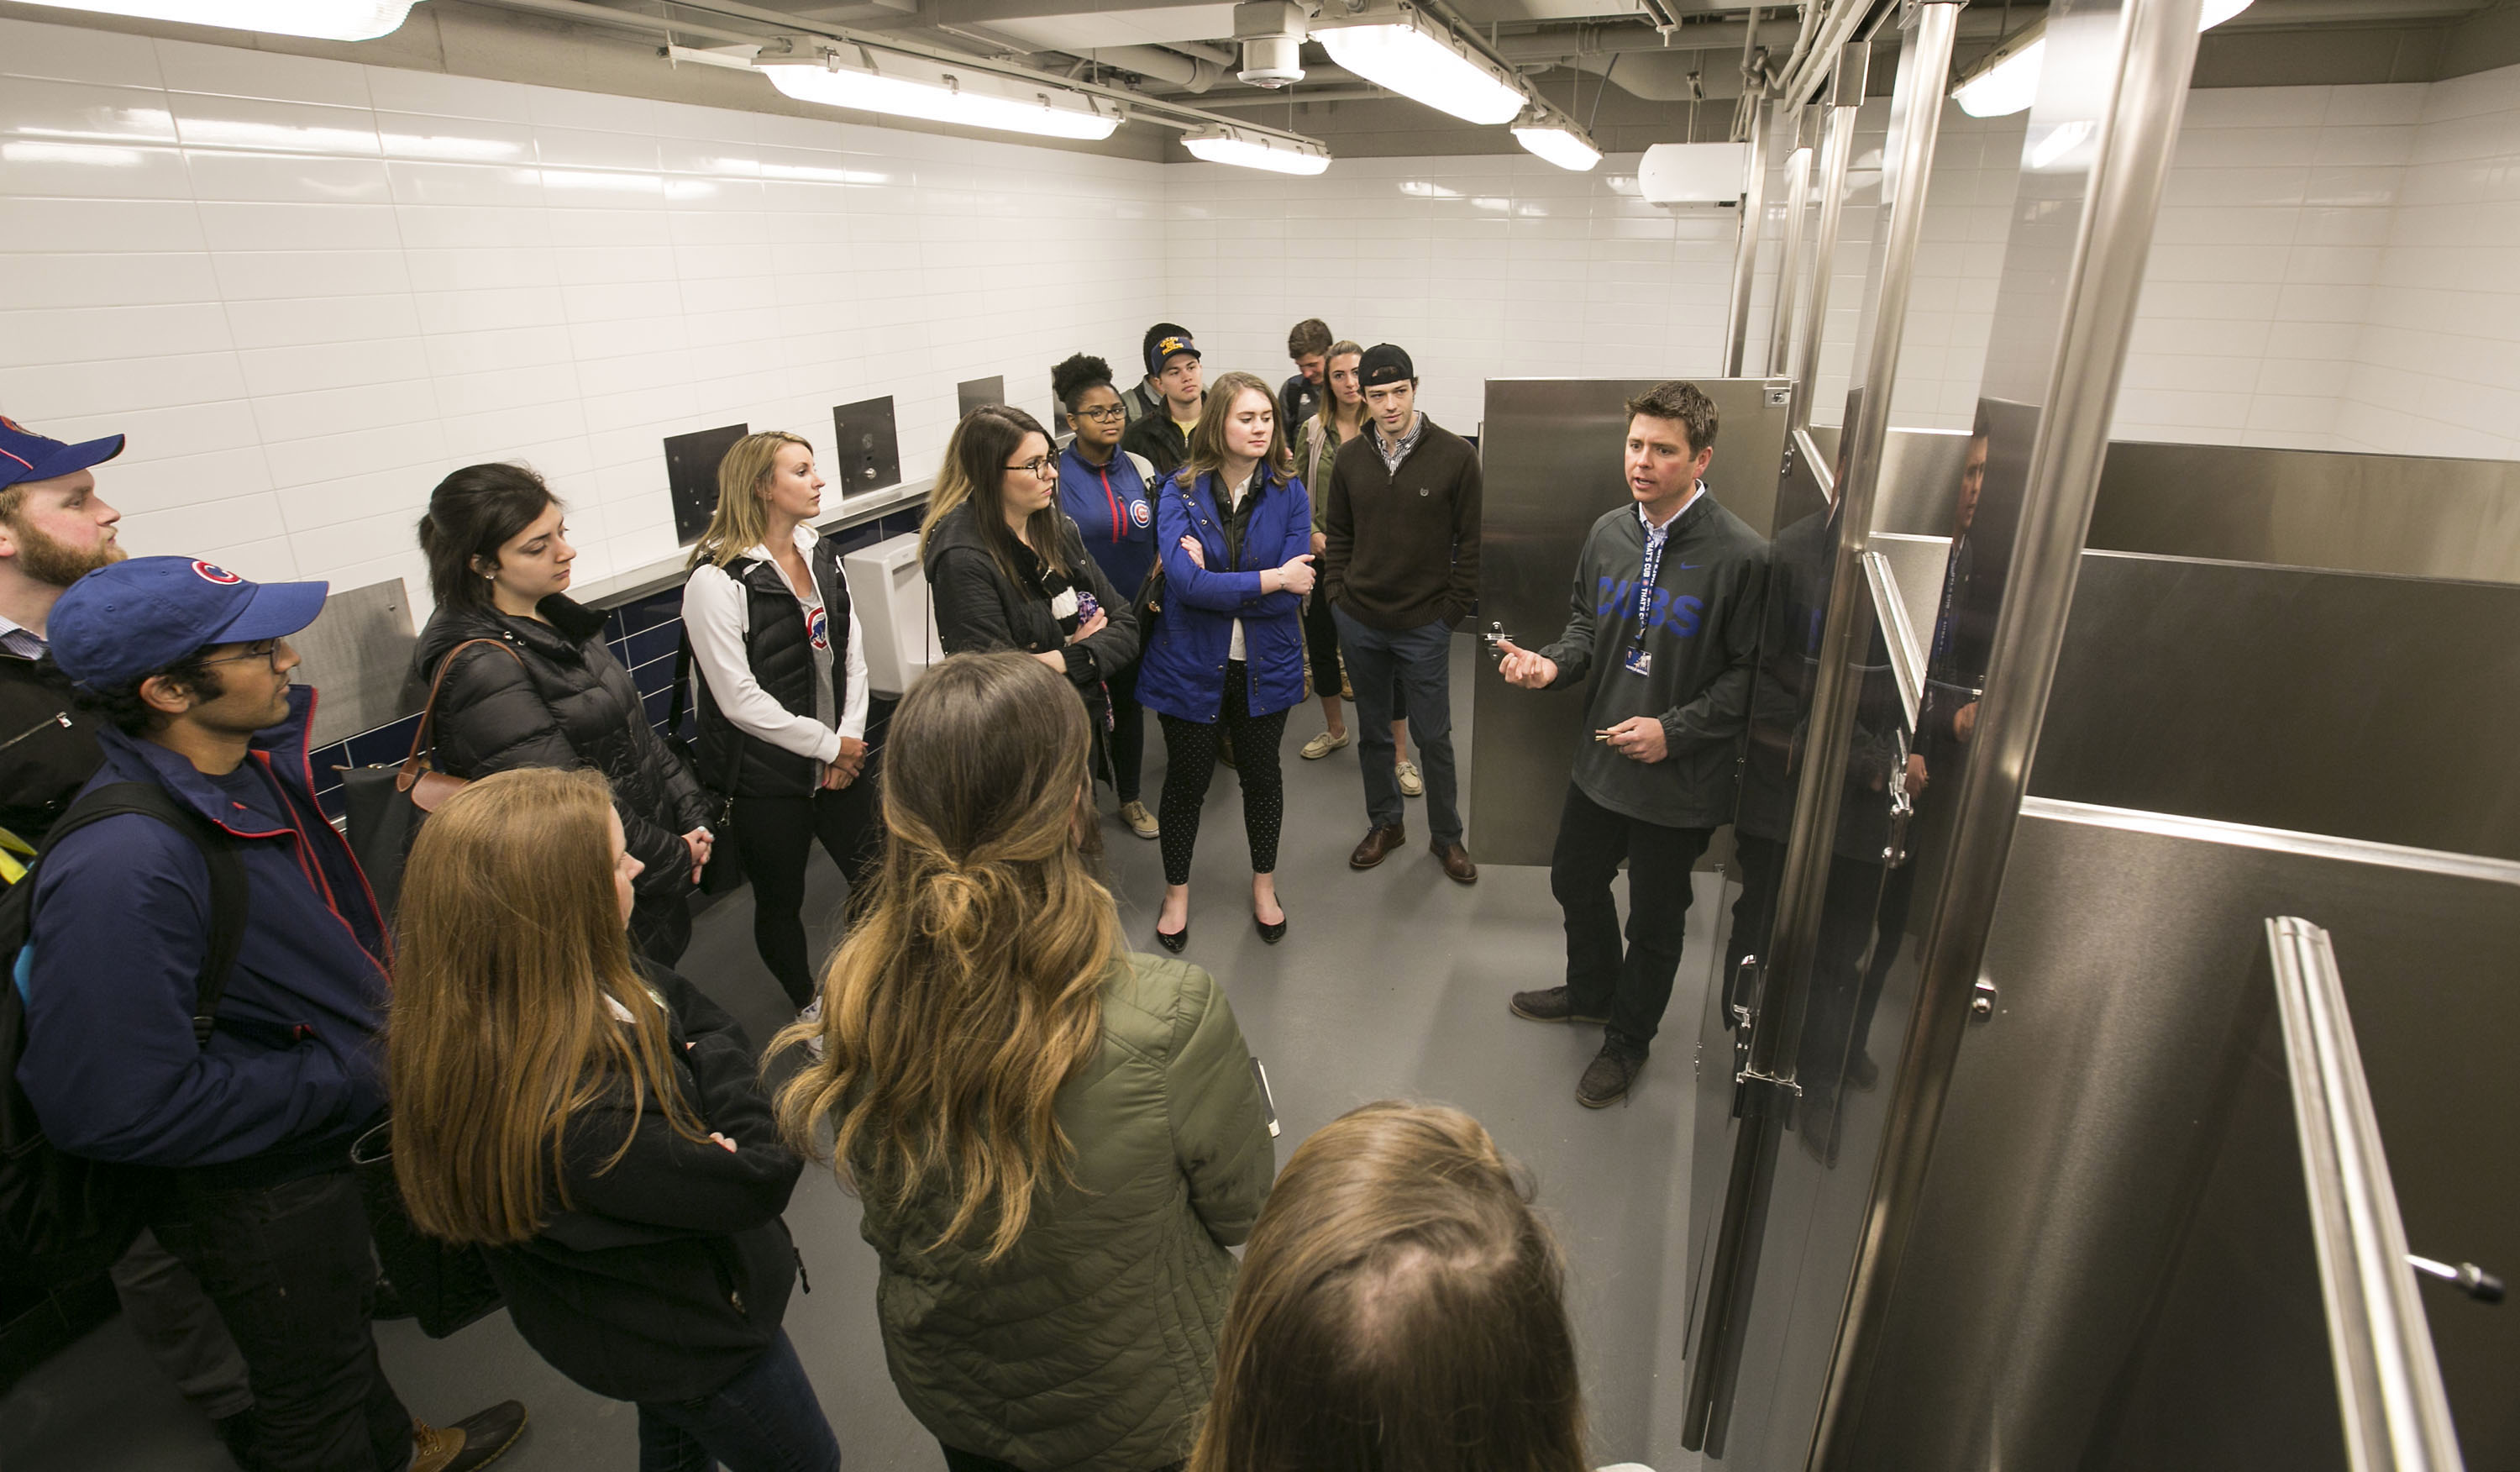 Patrick Meenan, right, senior director, facilities and procurement for the Chicago Cubs, leads a group of DePaul University students from Don Ingle's public relations and advertising class through a water sustainable bathroom at Chicago's Wrigley Field on May 10. (DePaul University/Jamie Moncrief)